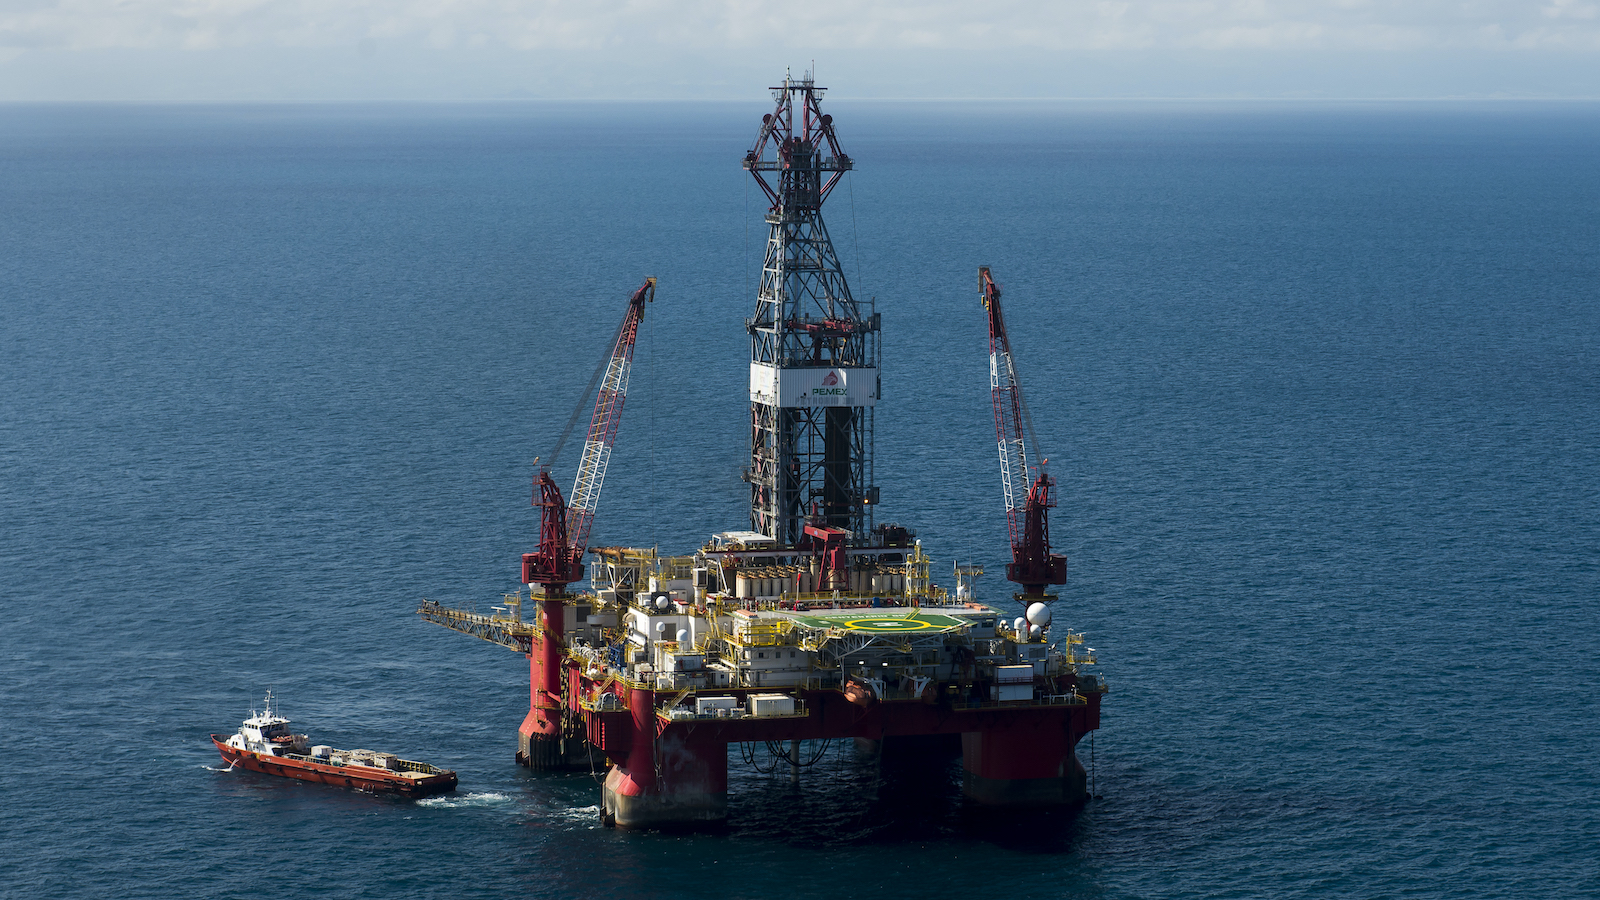 a giant piece of equipment and drill platform in the middle of the ocean